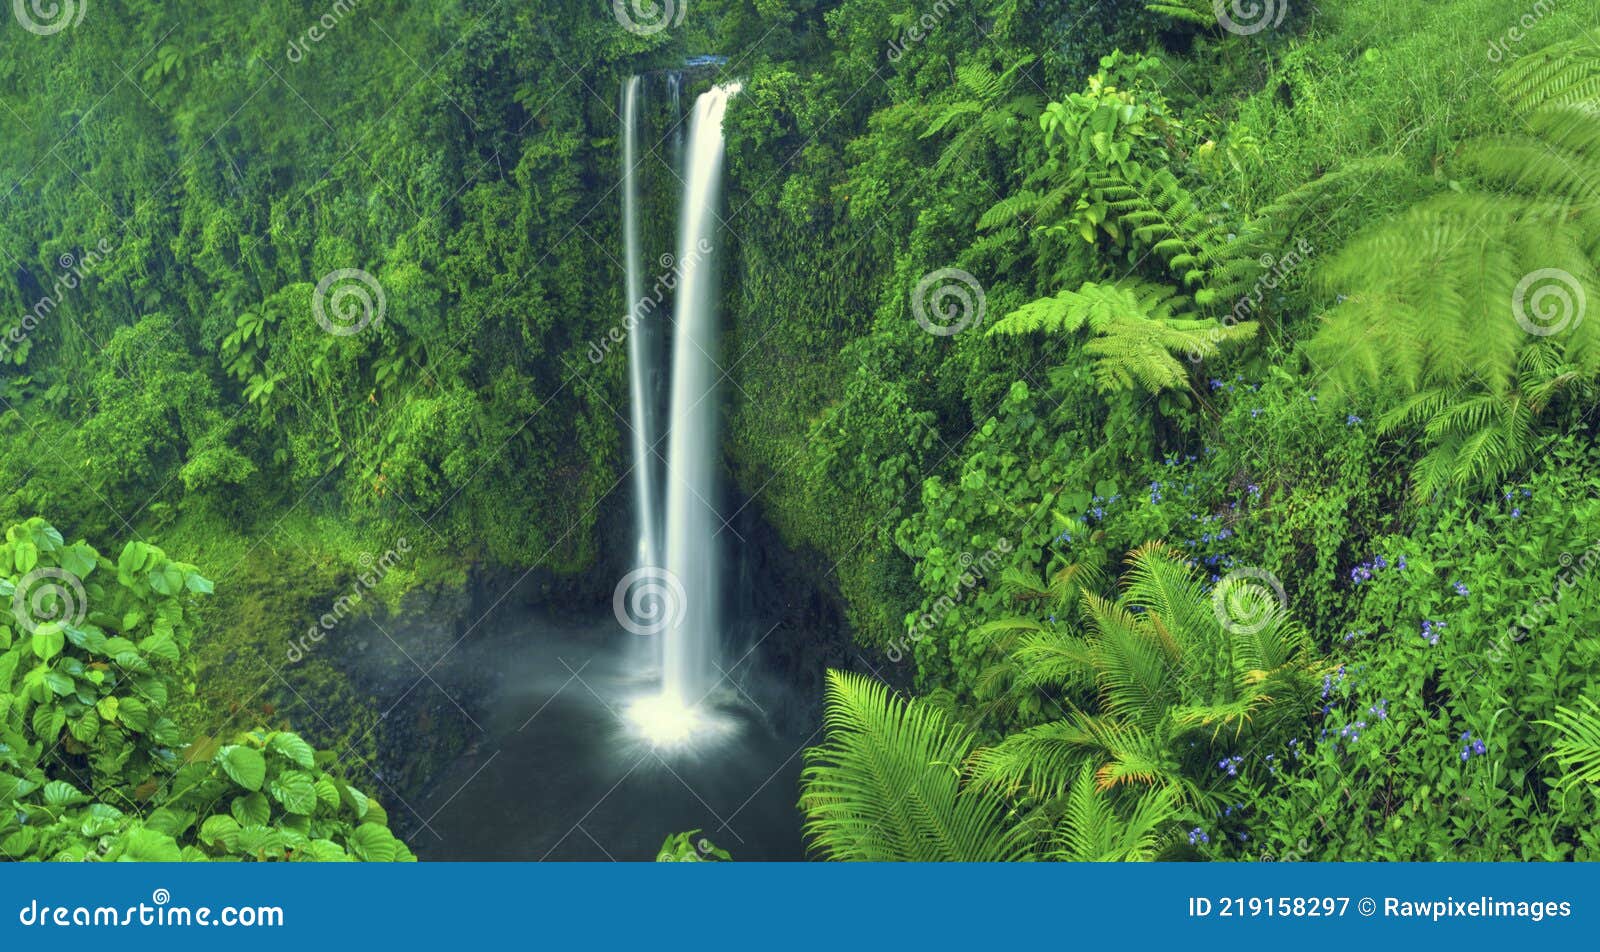 waterfall nature scenics waterfall forest concept